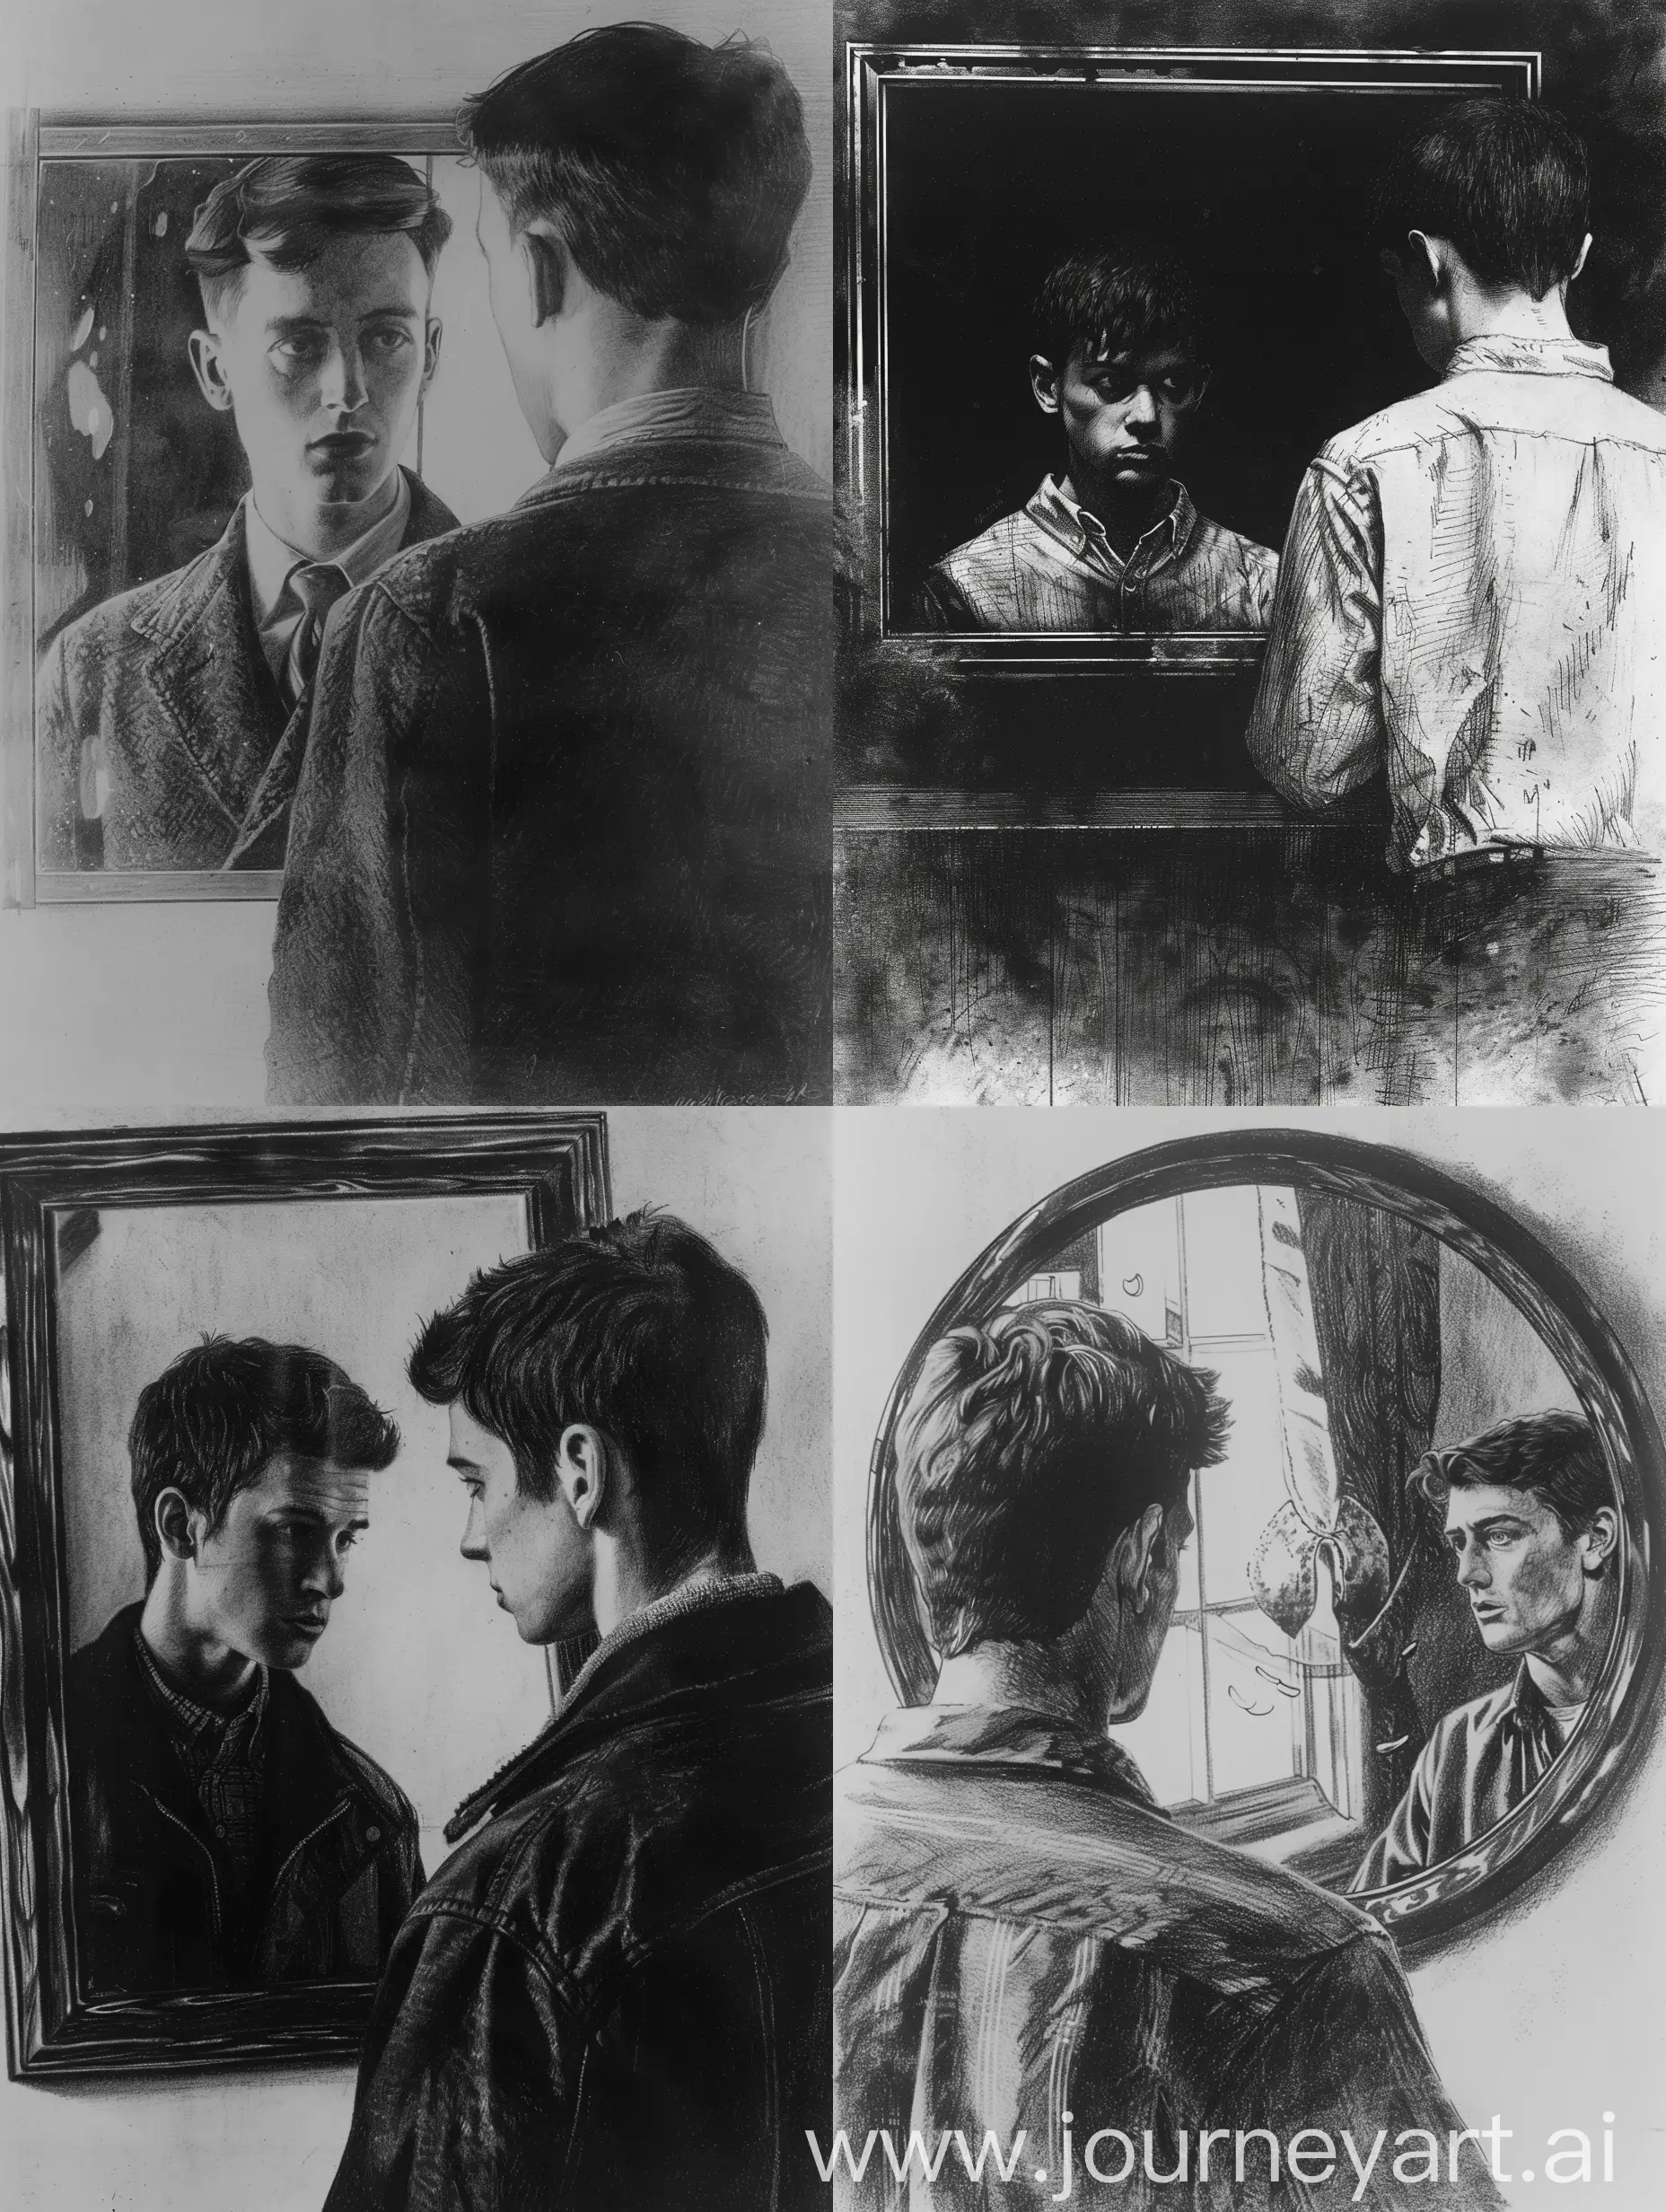 drawing, black/white, mirror, the reflection of the guy in the mirror in the first person